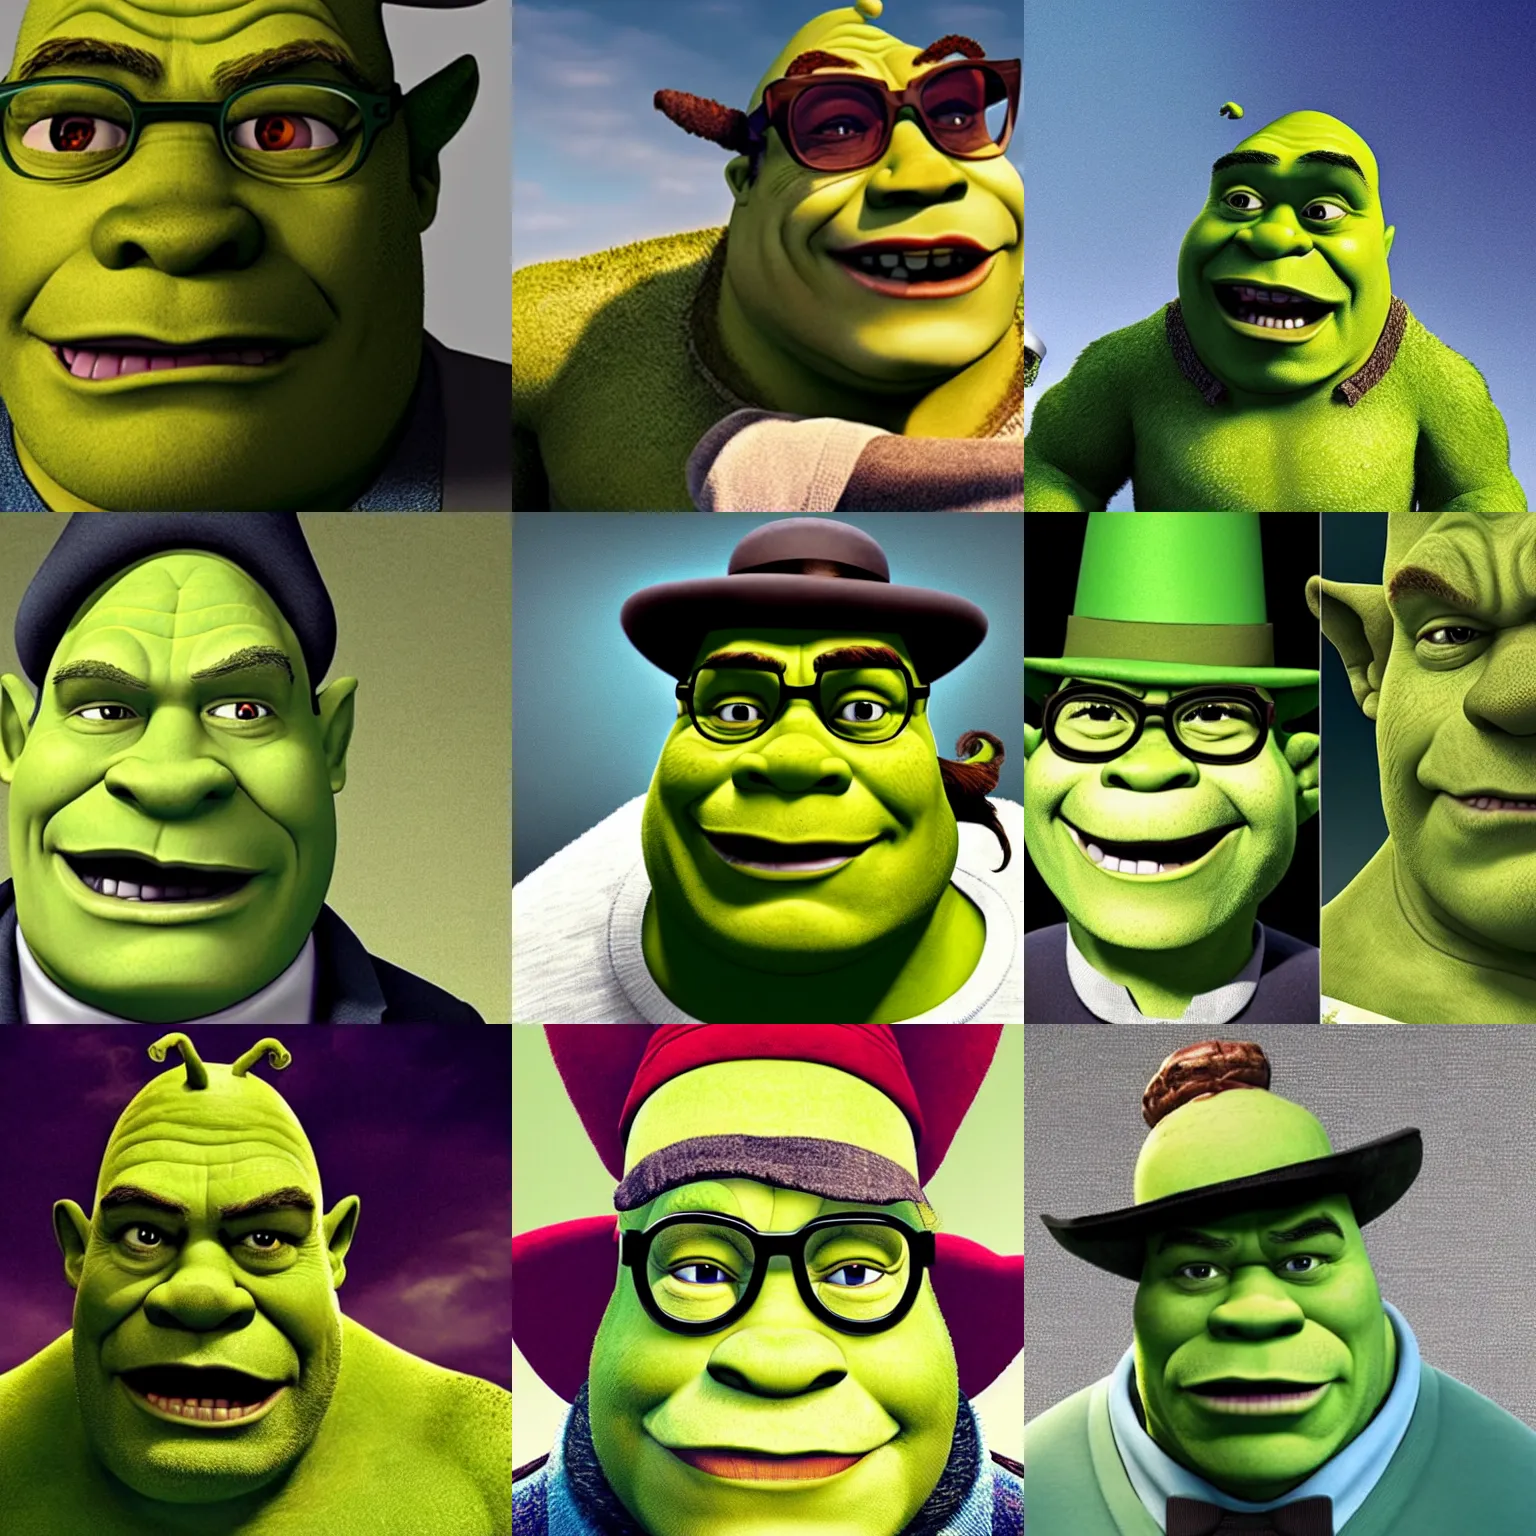 Prompt: shrek ogre that looks like bryan cranston as walter white with goatee, wearing bowler hat and sunglasses